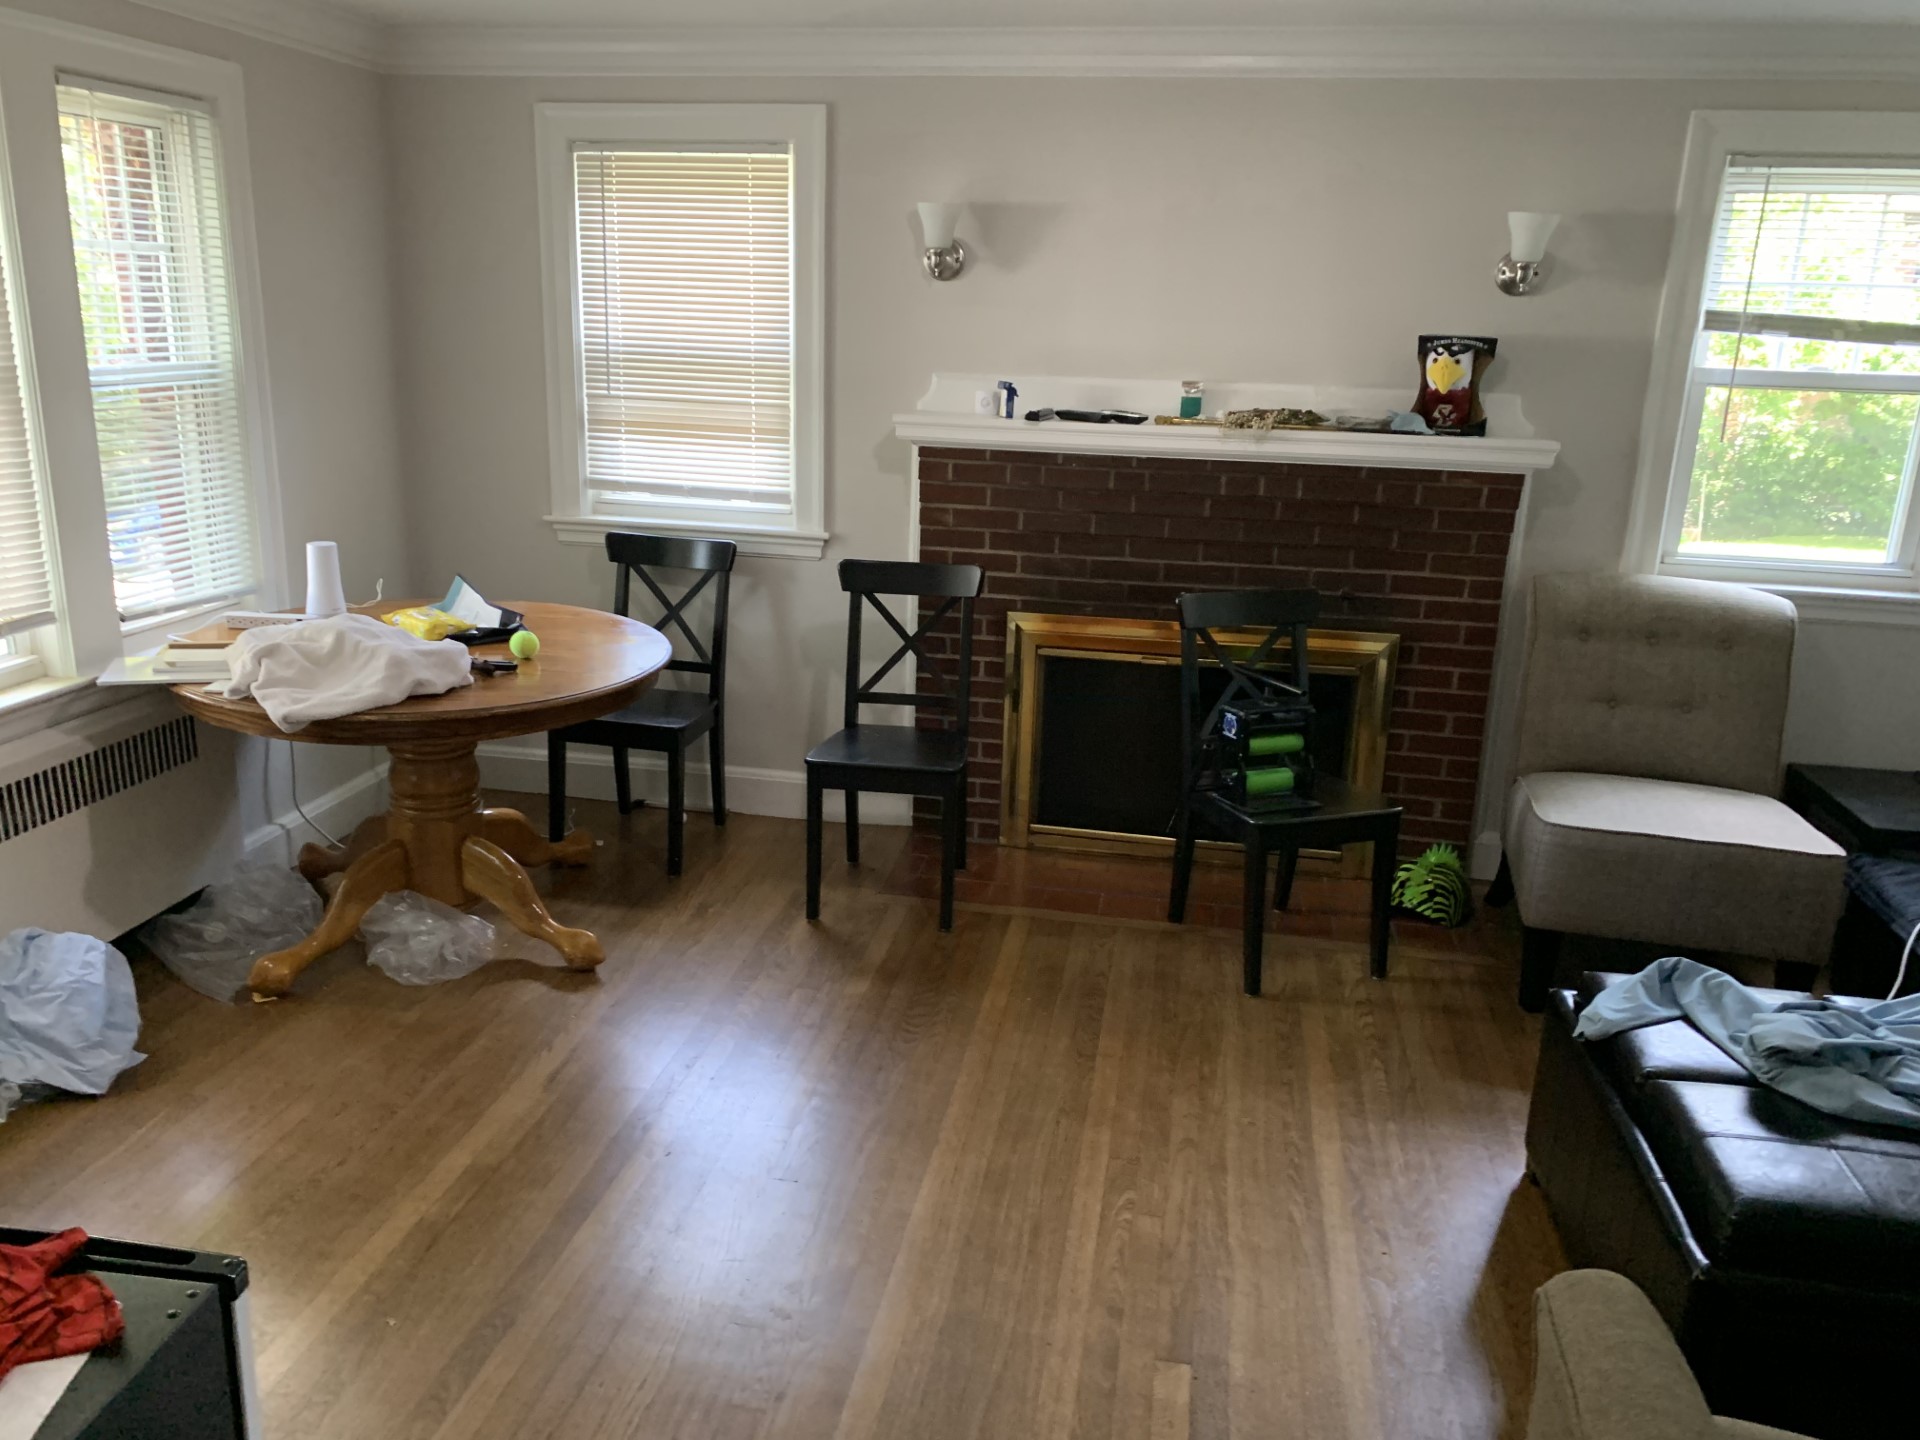 Photos of apartment on Greycliff Rd.,Boston MA 02135